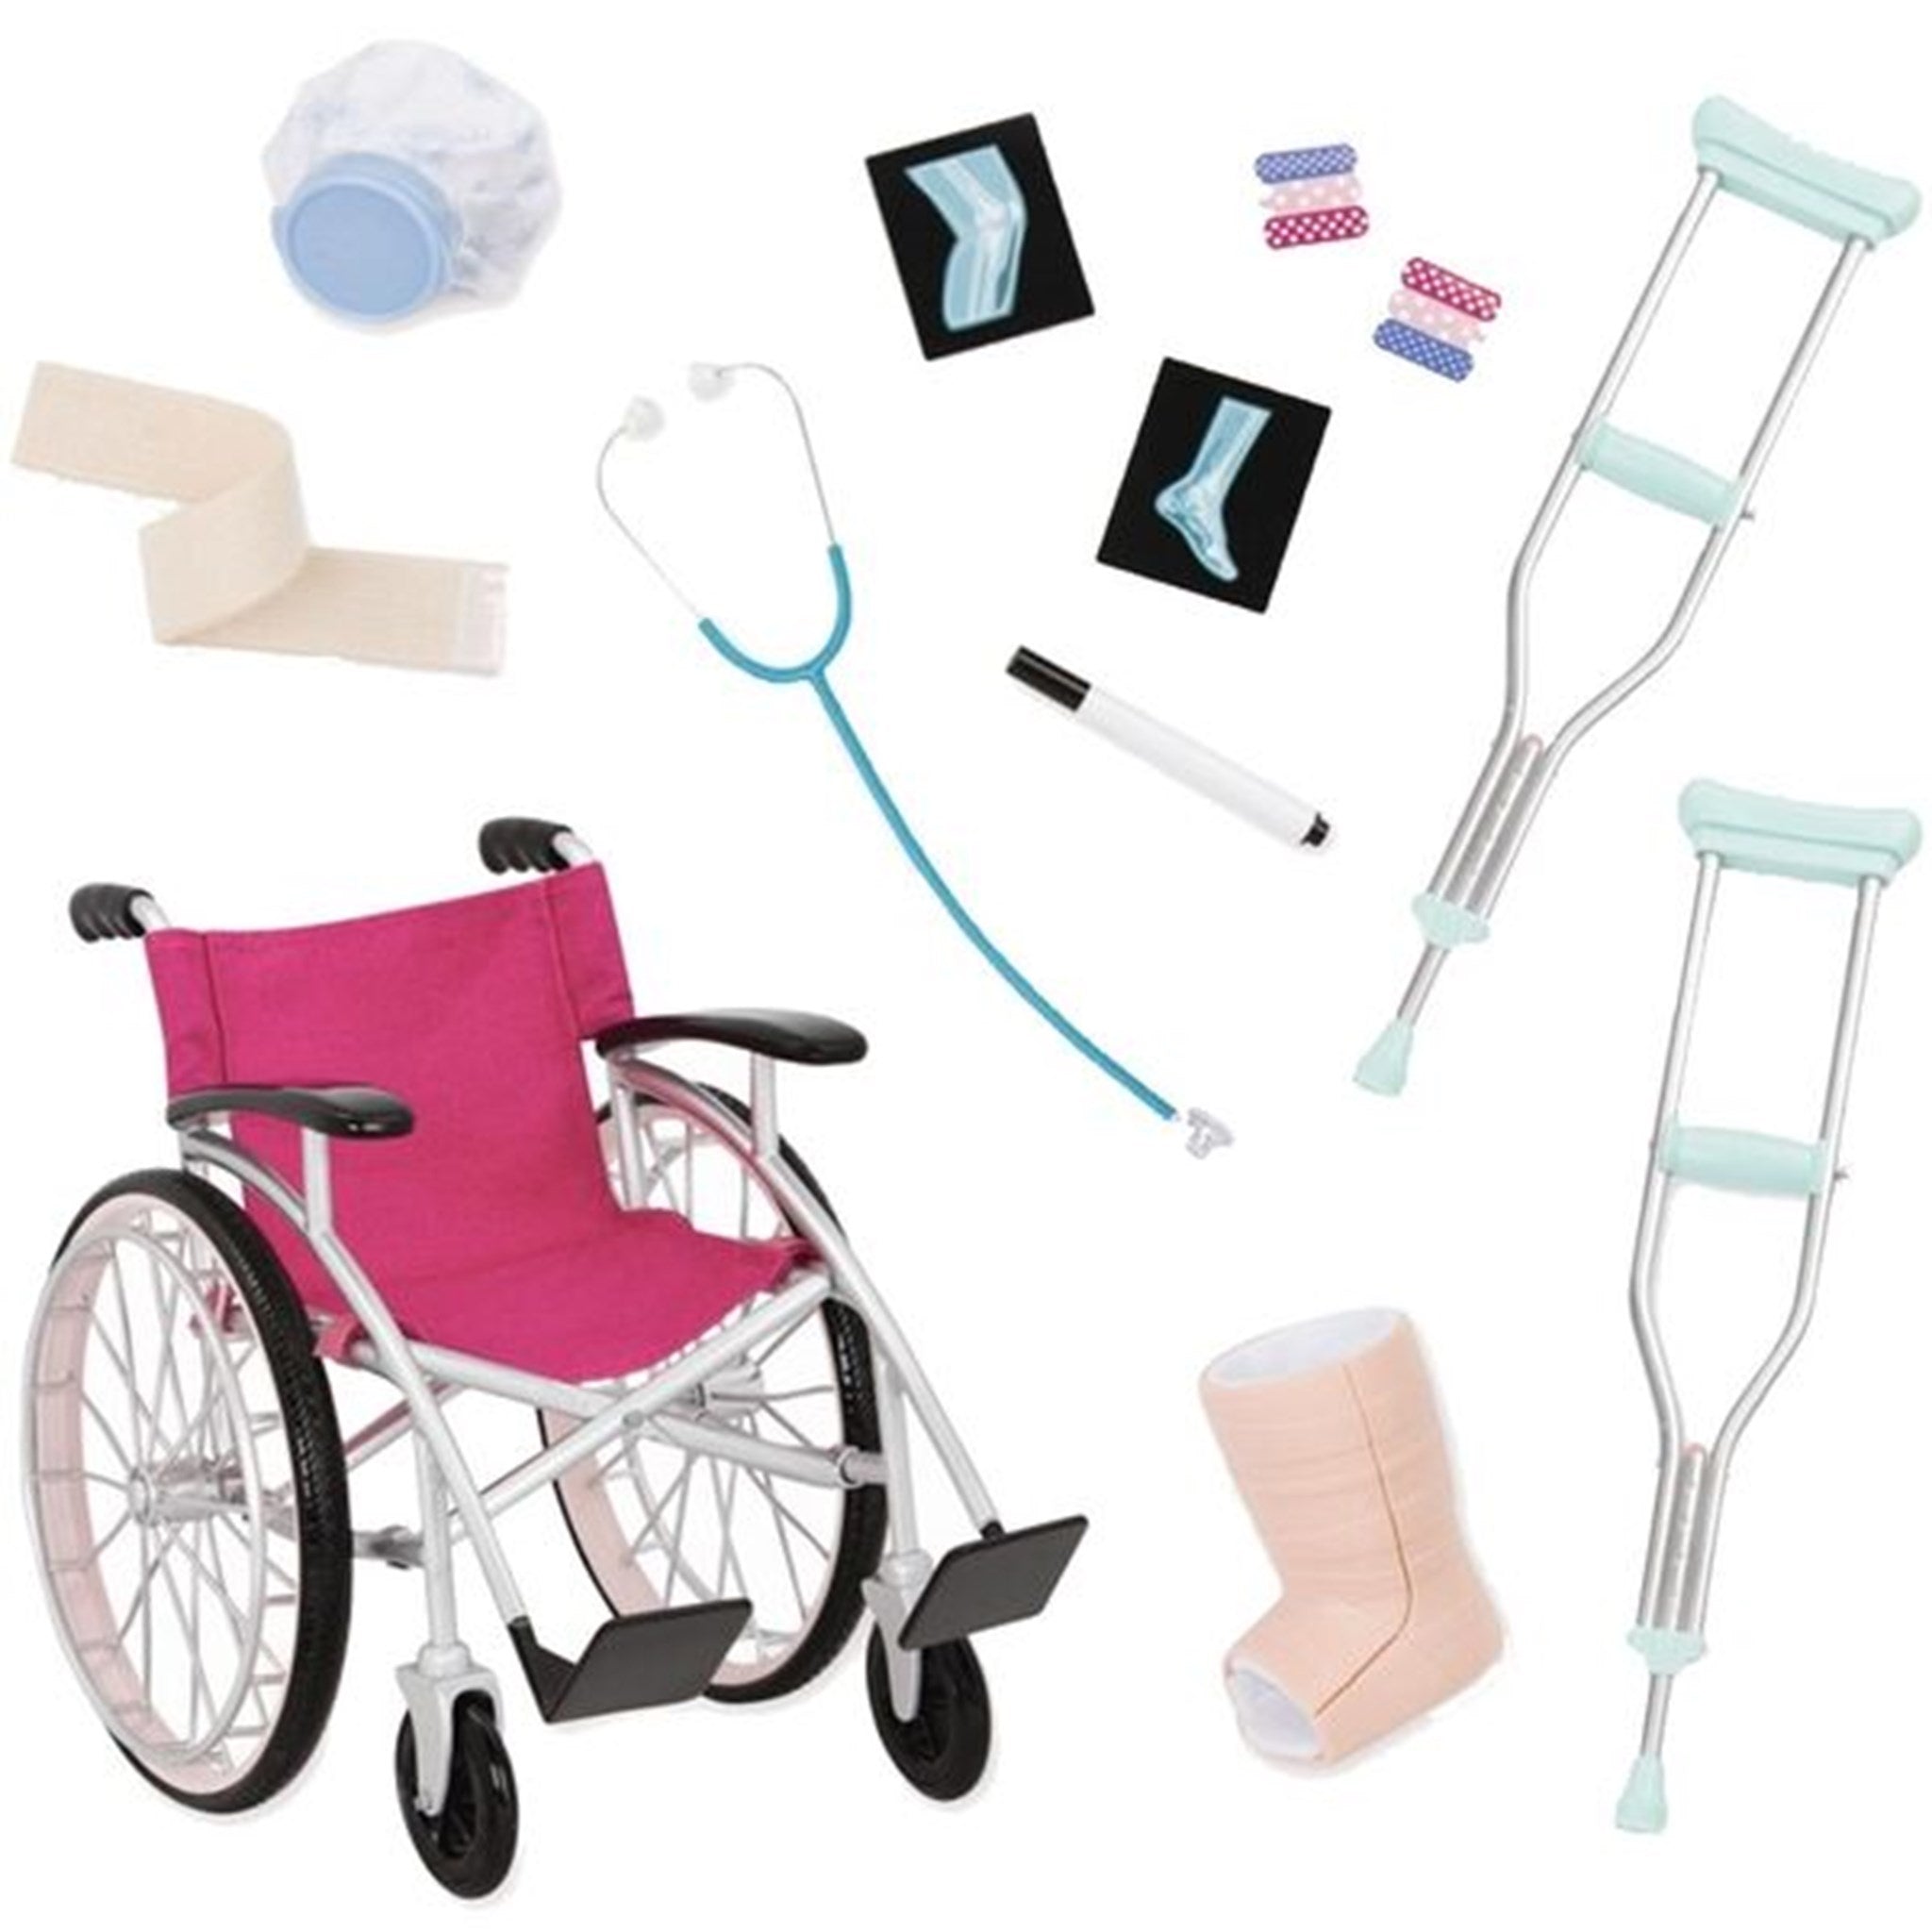 Our Generation Doll Accessories - Hospital Set